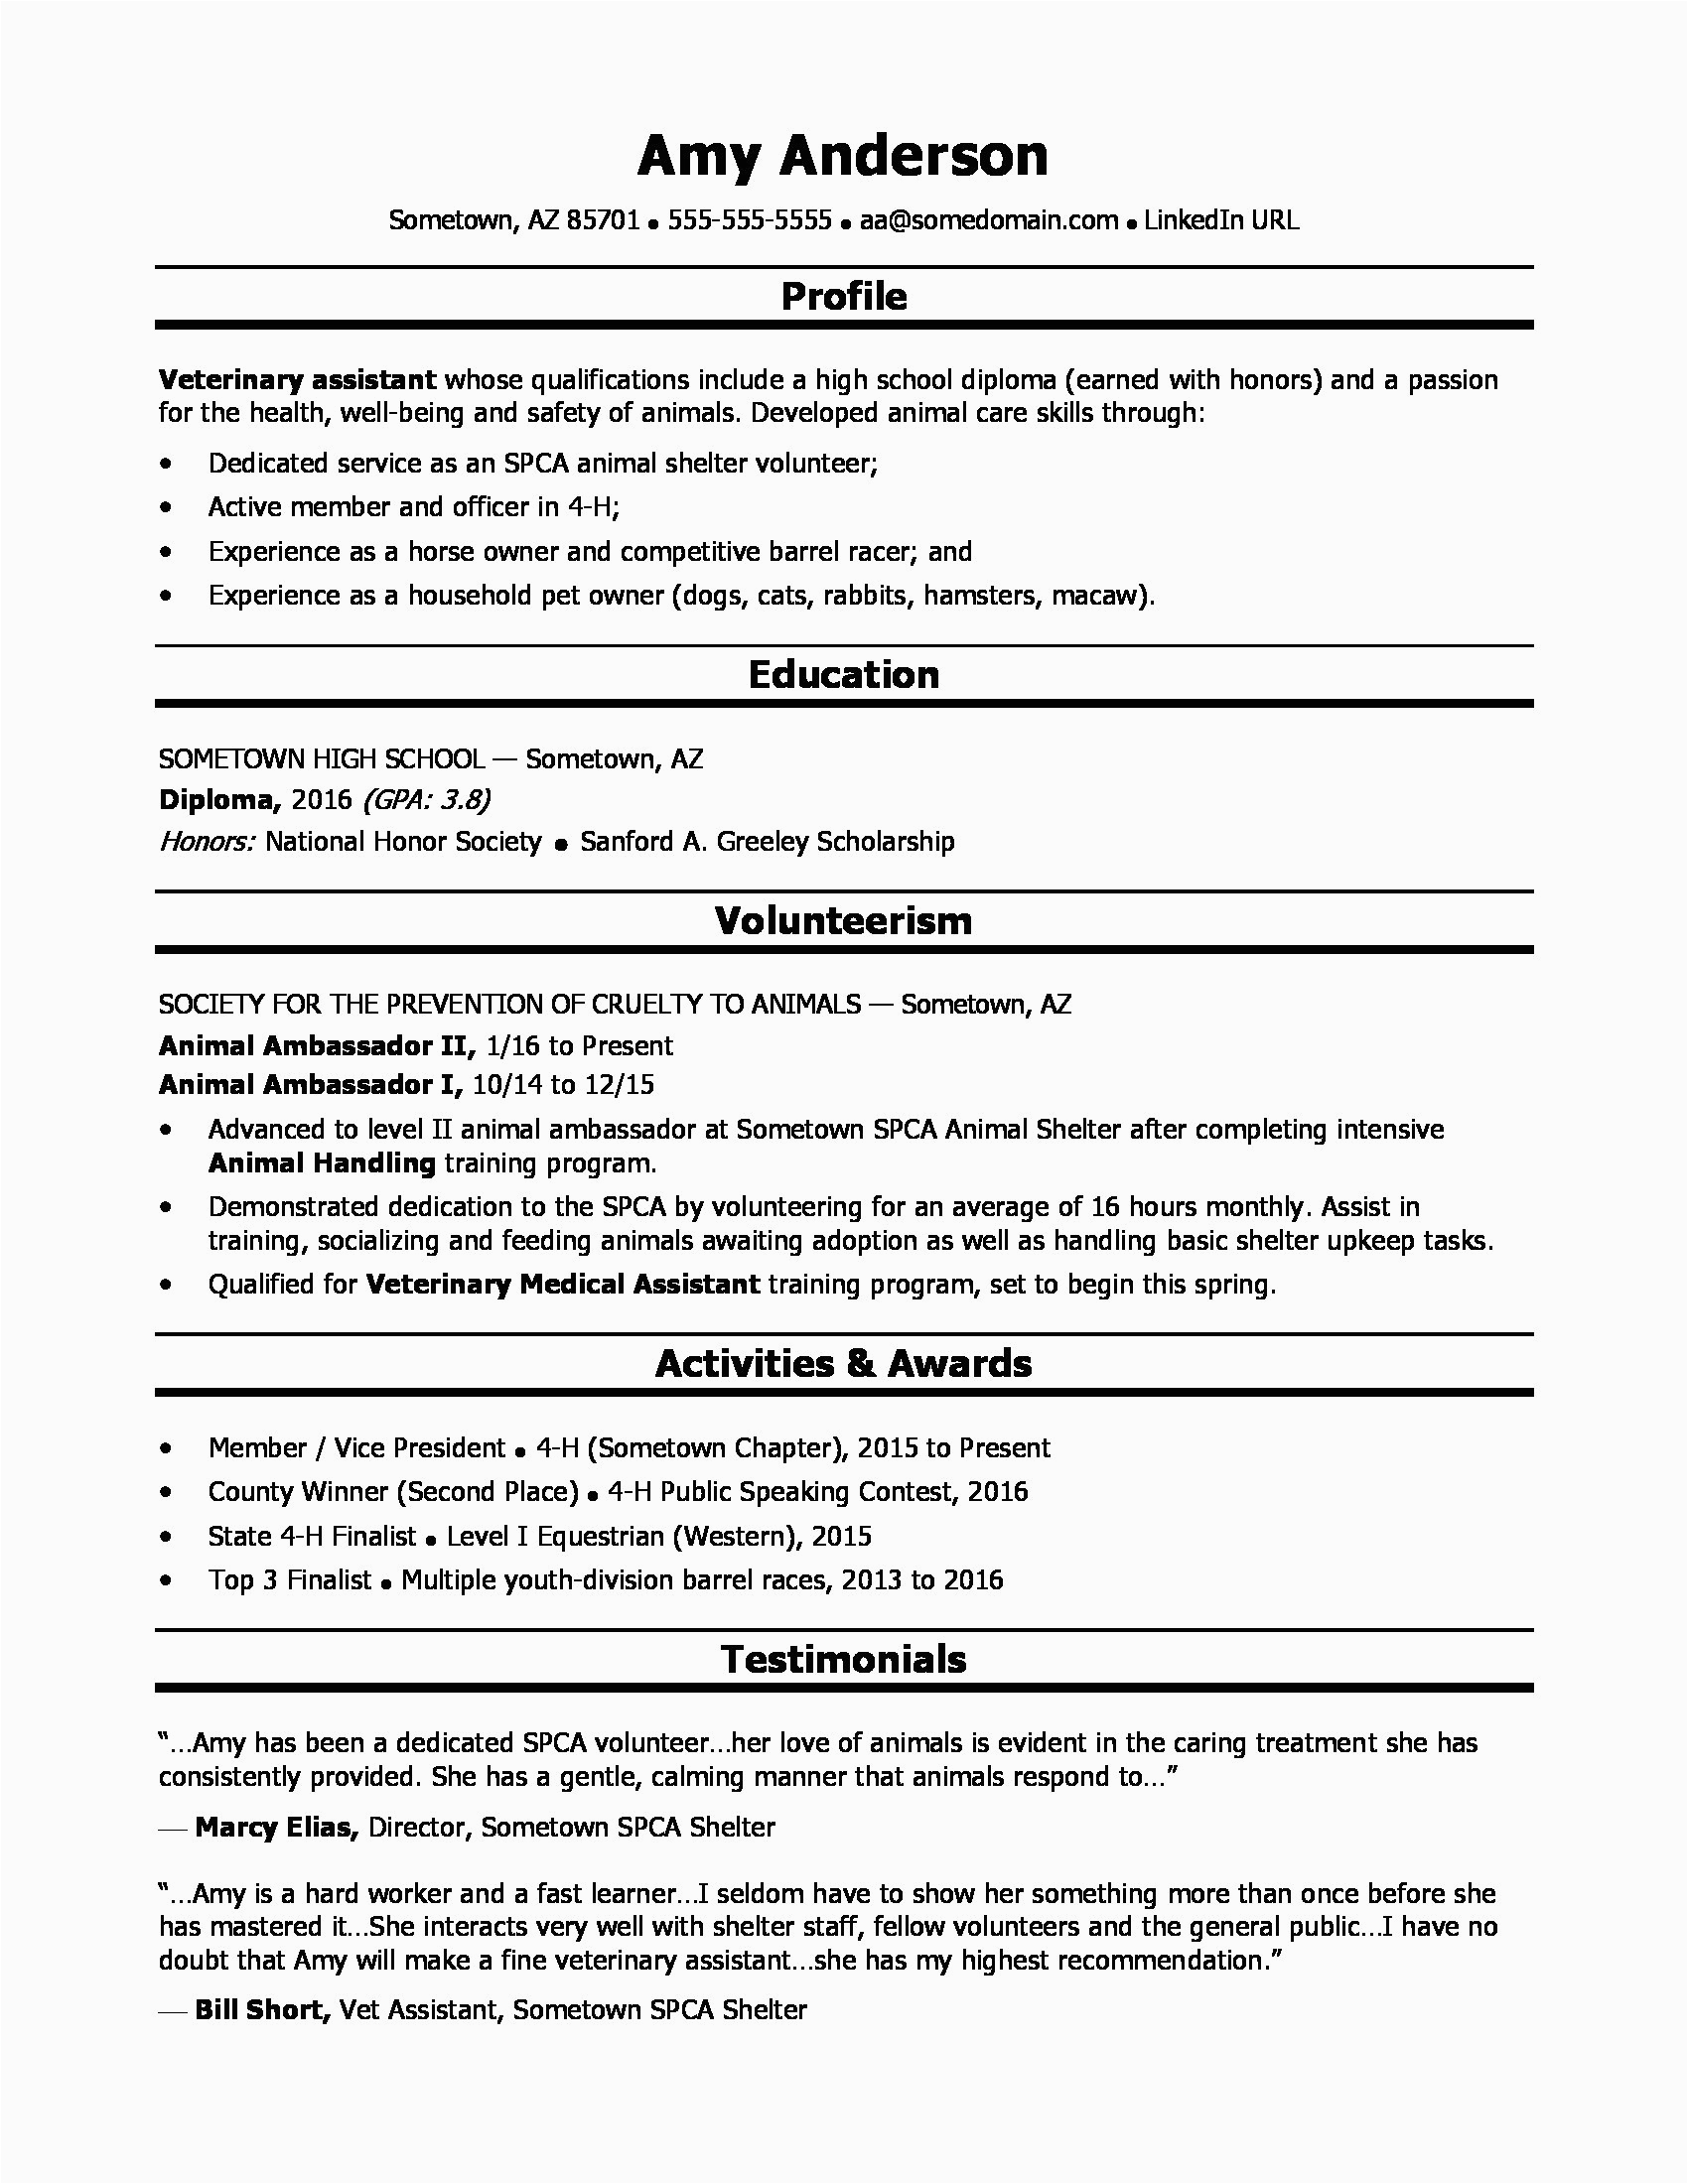 Sample Resume for High School Graduate In the Philippines Resume Samples for High School Graduate In the Philippines